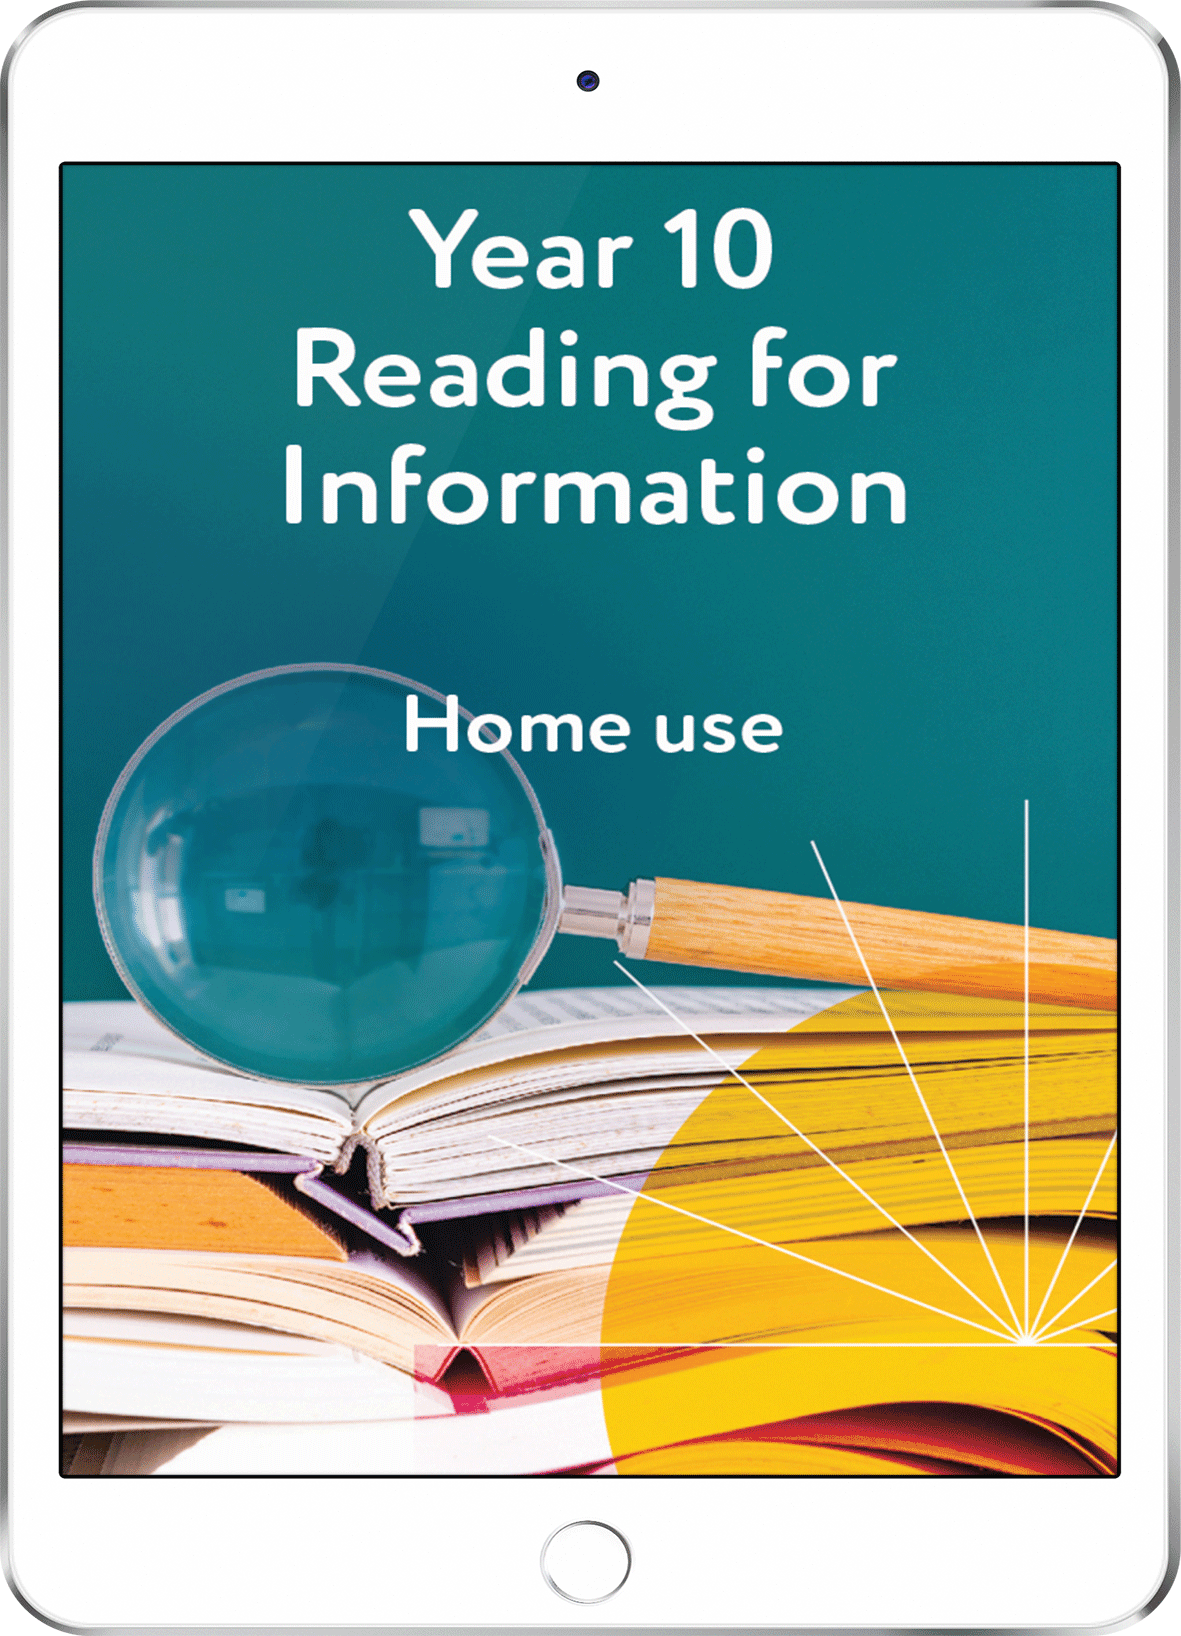 Year 10 Reading for Information - Home Use